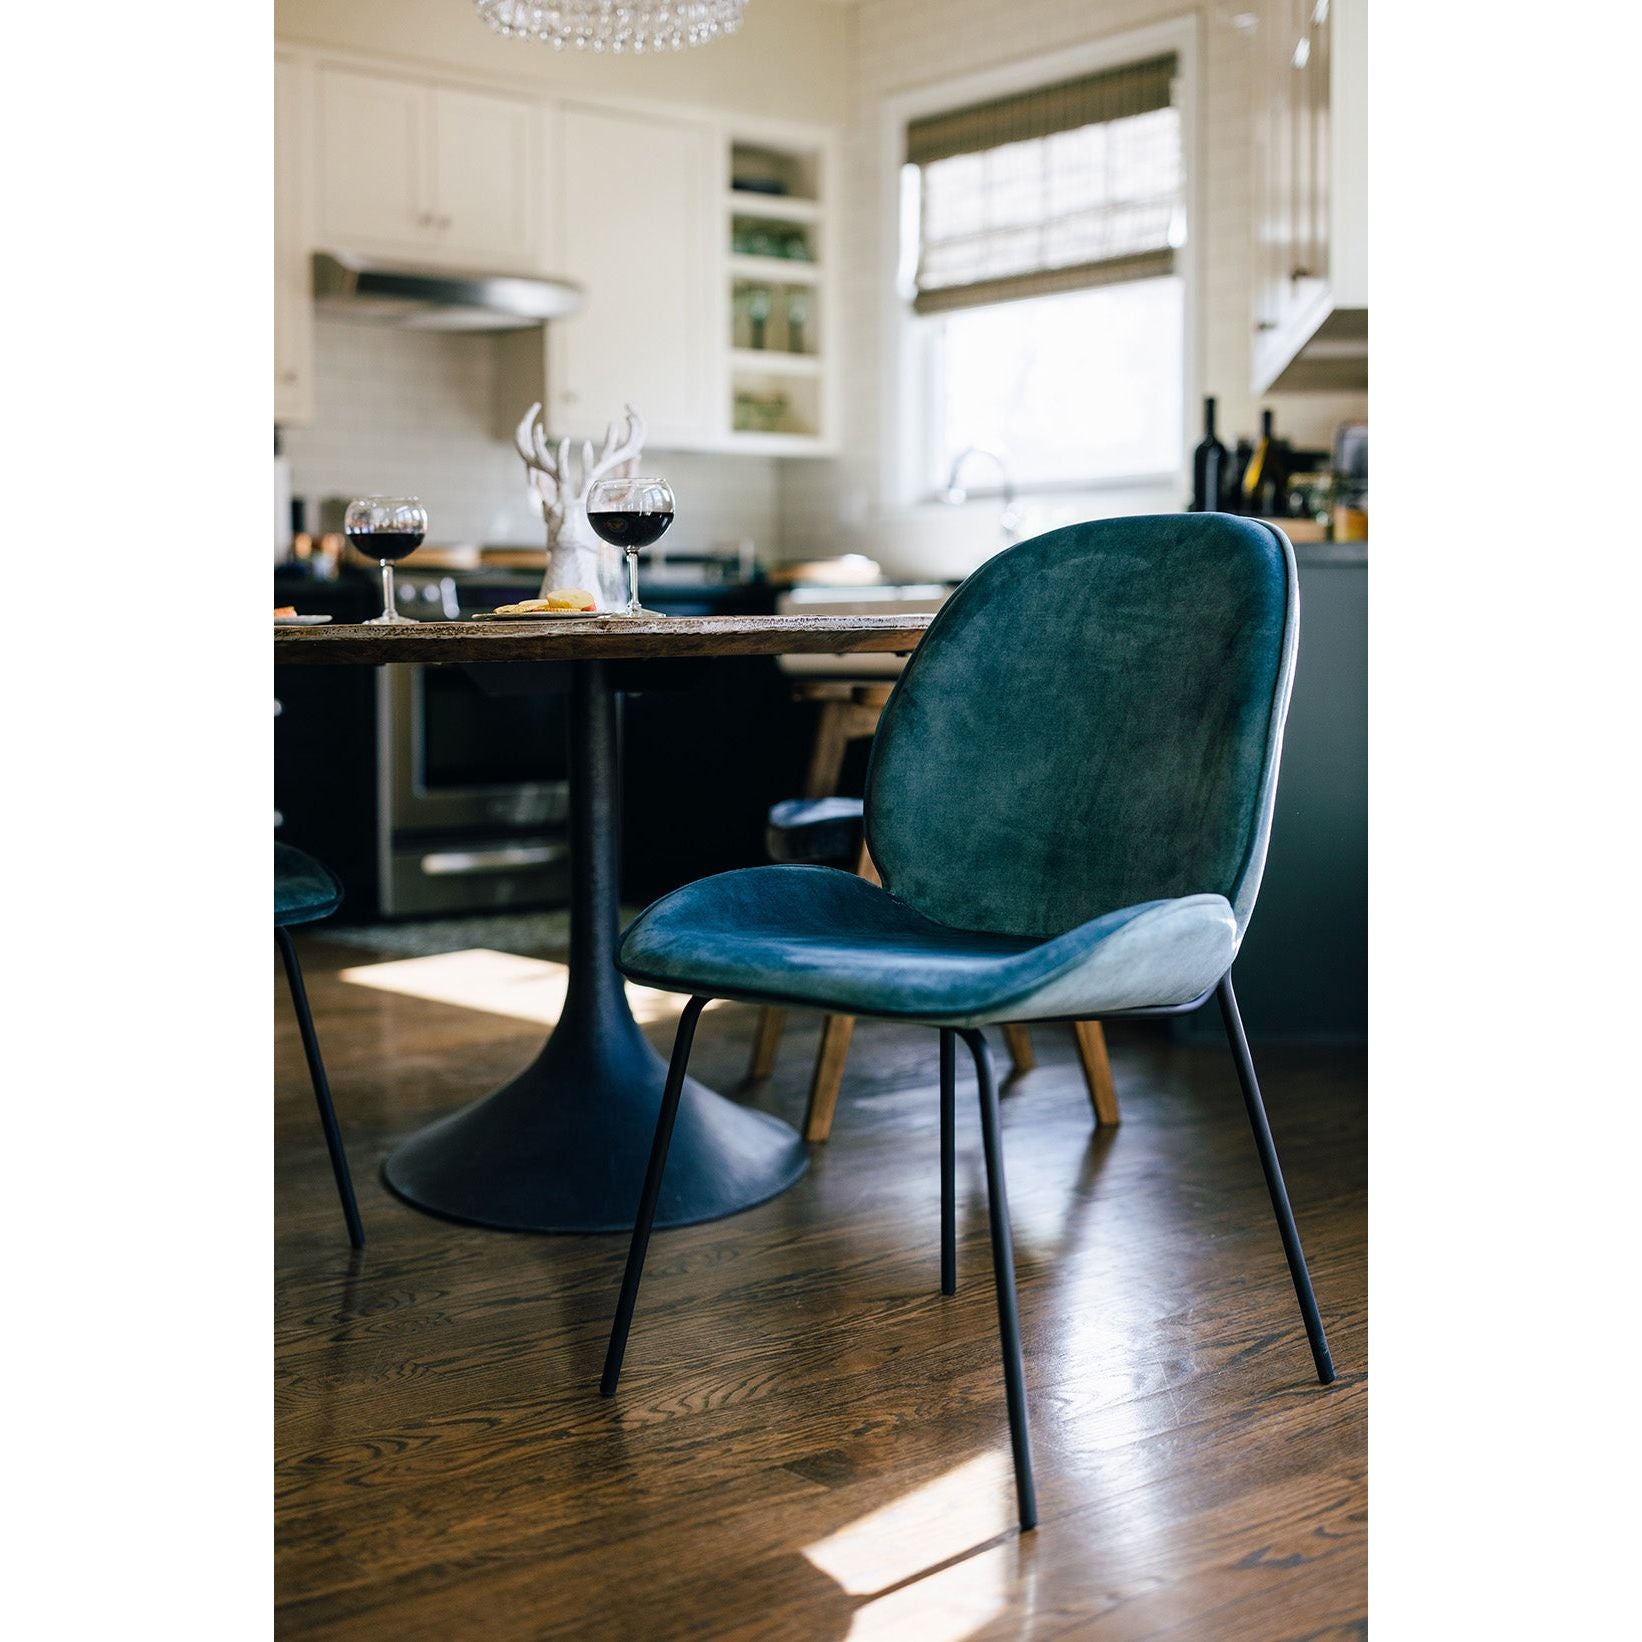 A modern kitchen features a black round pedestal table with two glasses of red wine and a decorative white antler sculpture on top. A King Dining Chair, Smoked Turquoise sits in the foreground on a wooden floor, while bright natural light fills the space.